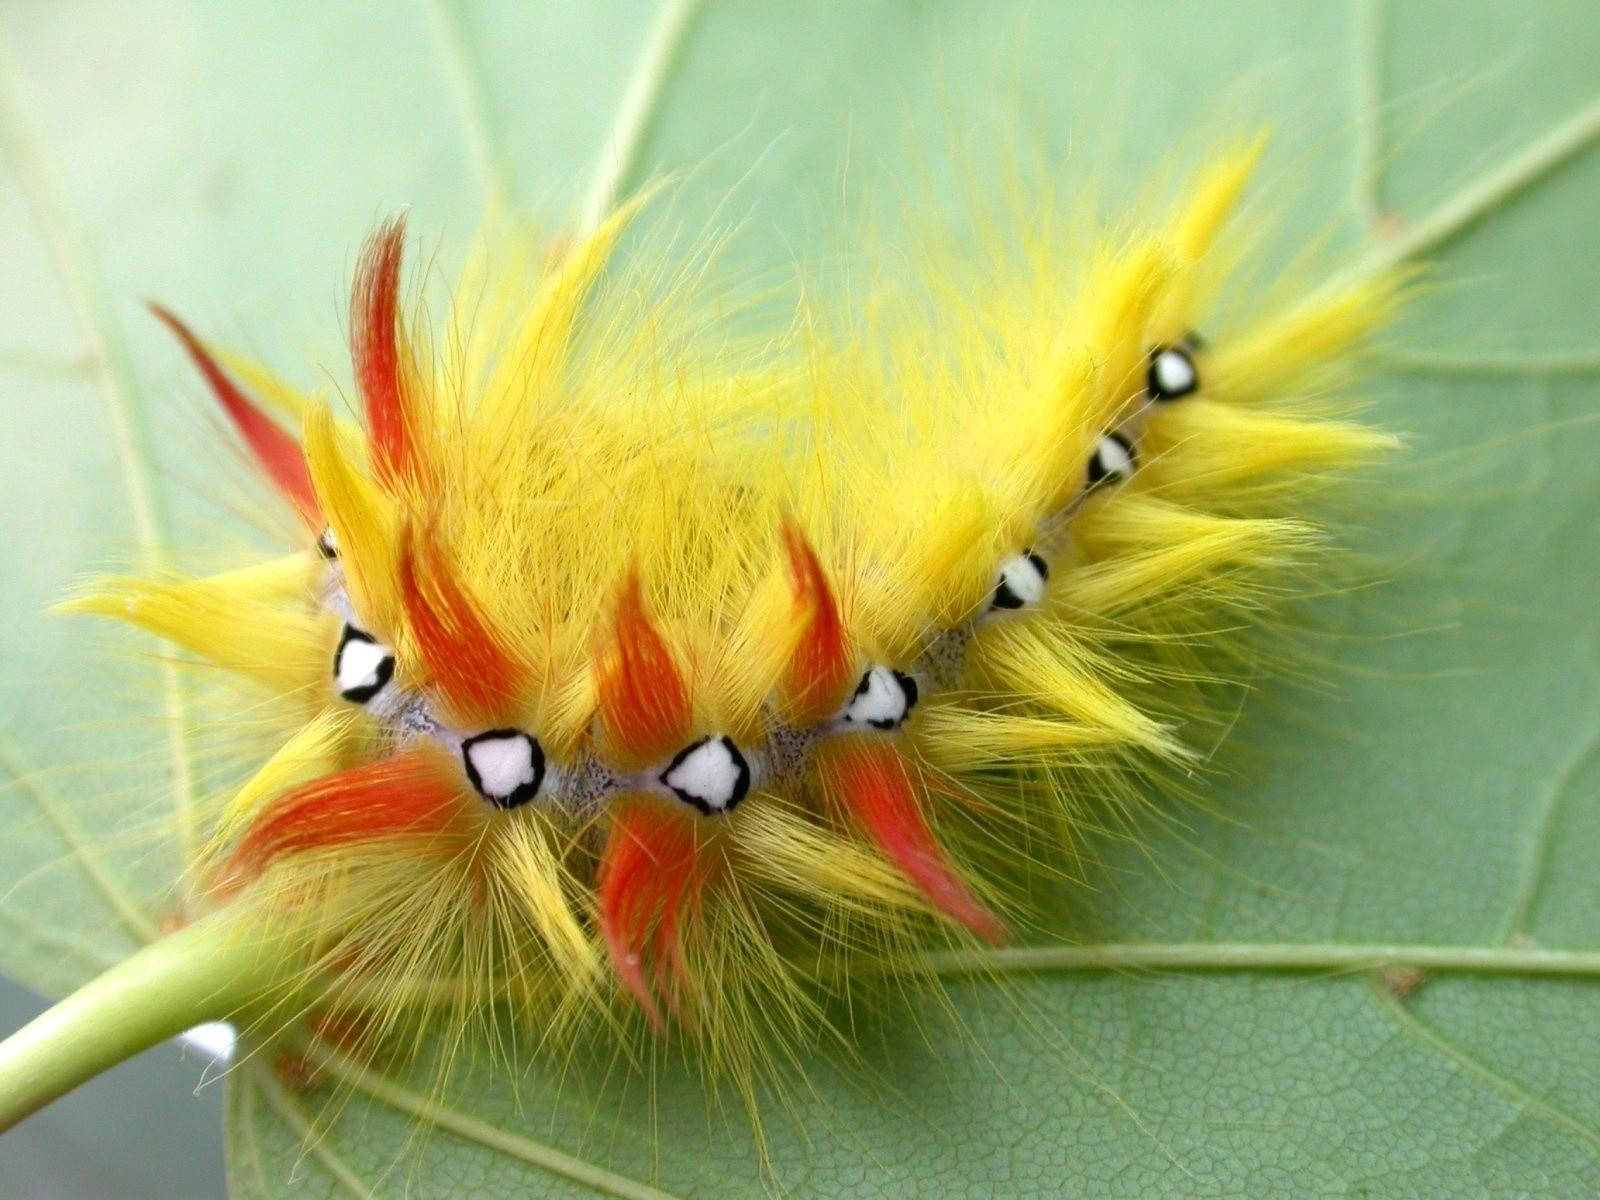 Hairy Yellow Caterpillar In Leaf Background